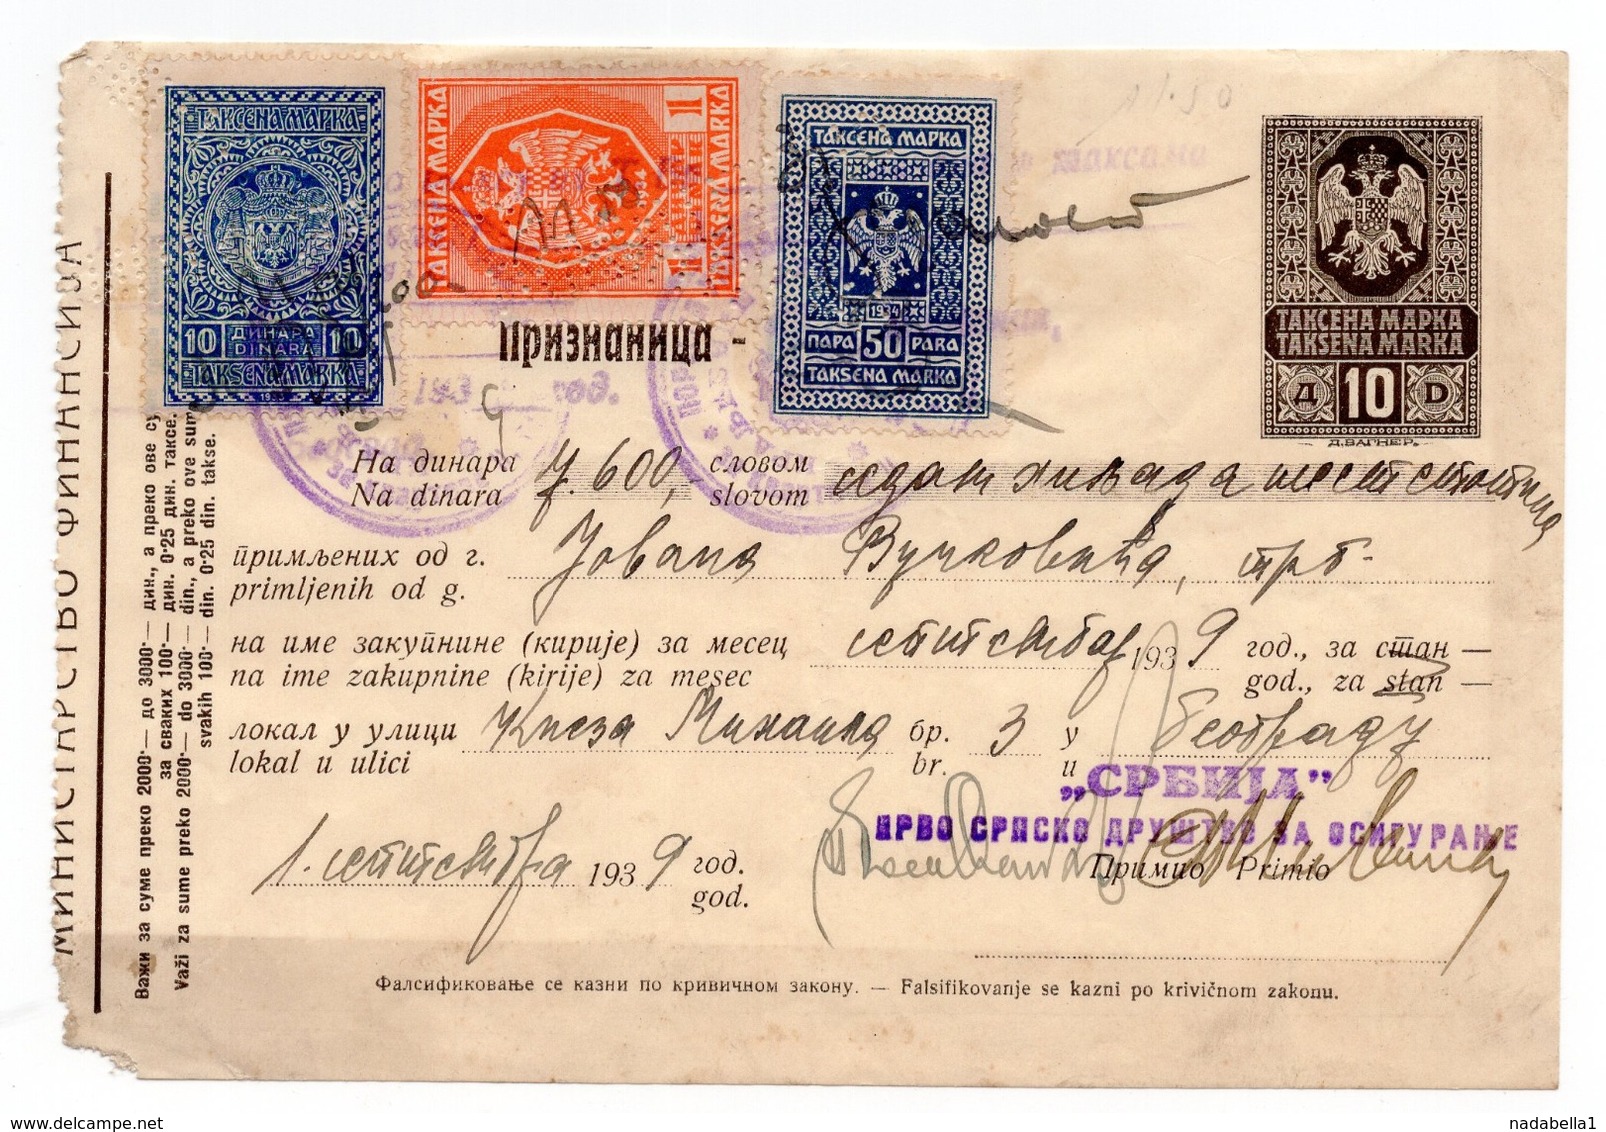 1939 YUGOSLAVIA, SERBIA, BELGRADE, INSURANCE PAYMENT RECEIPT, 3 REVENUE STAMPS AND 1 PREPRINTED - Covers & Documents